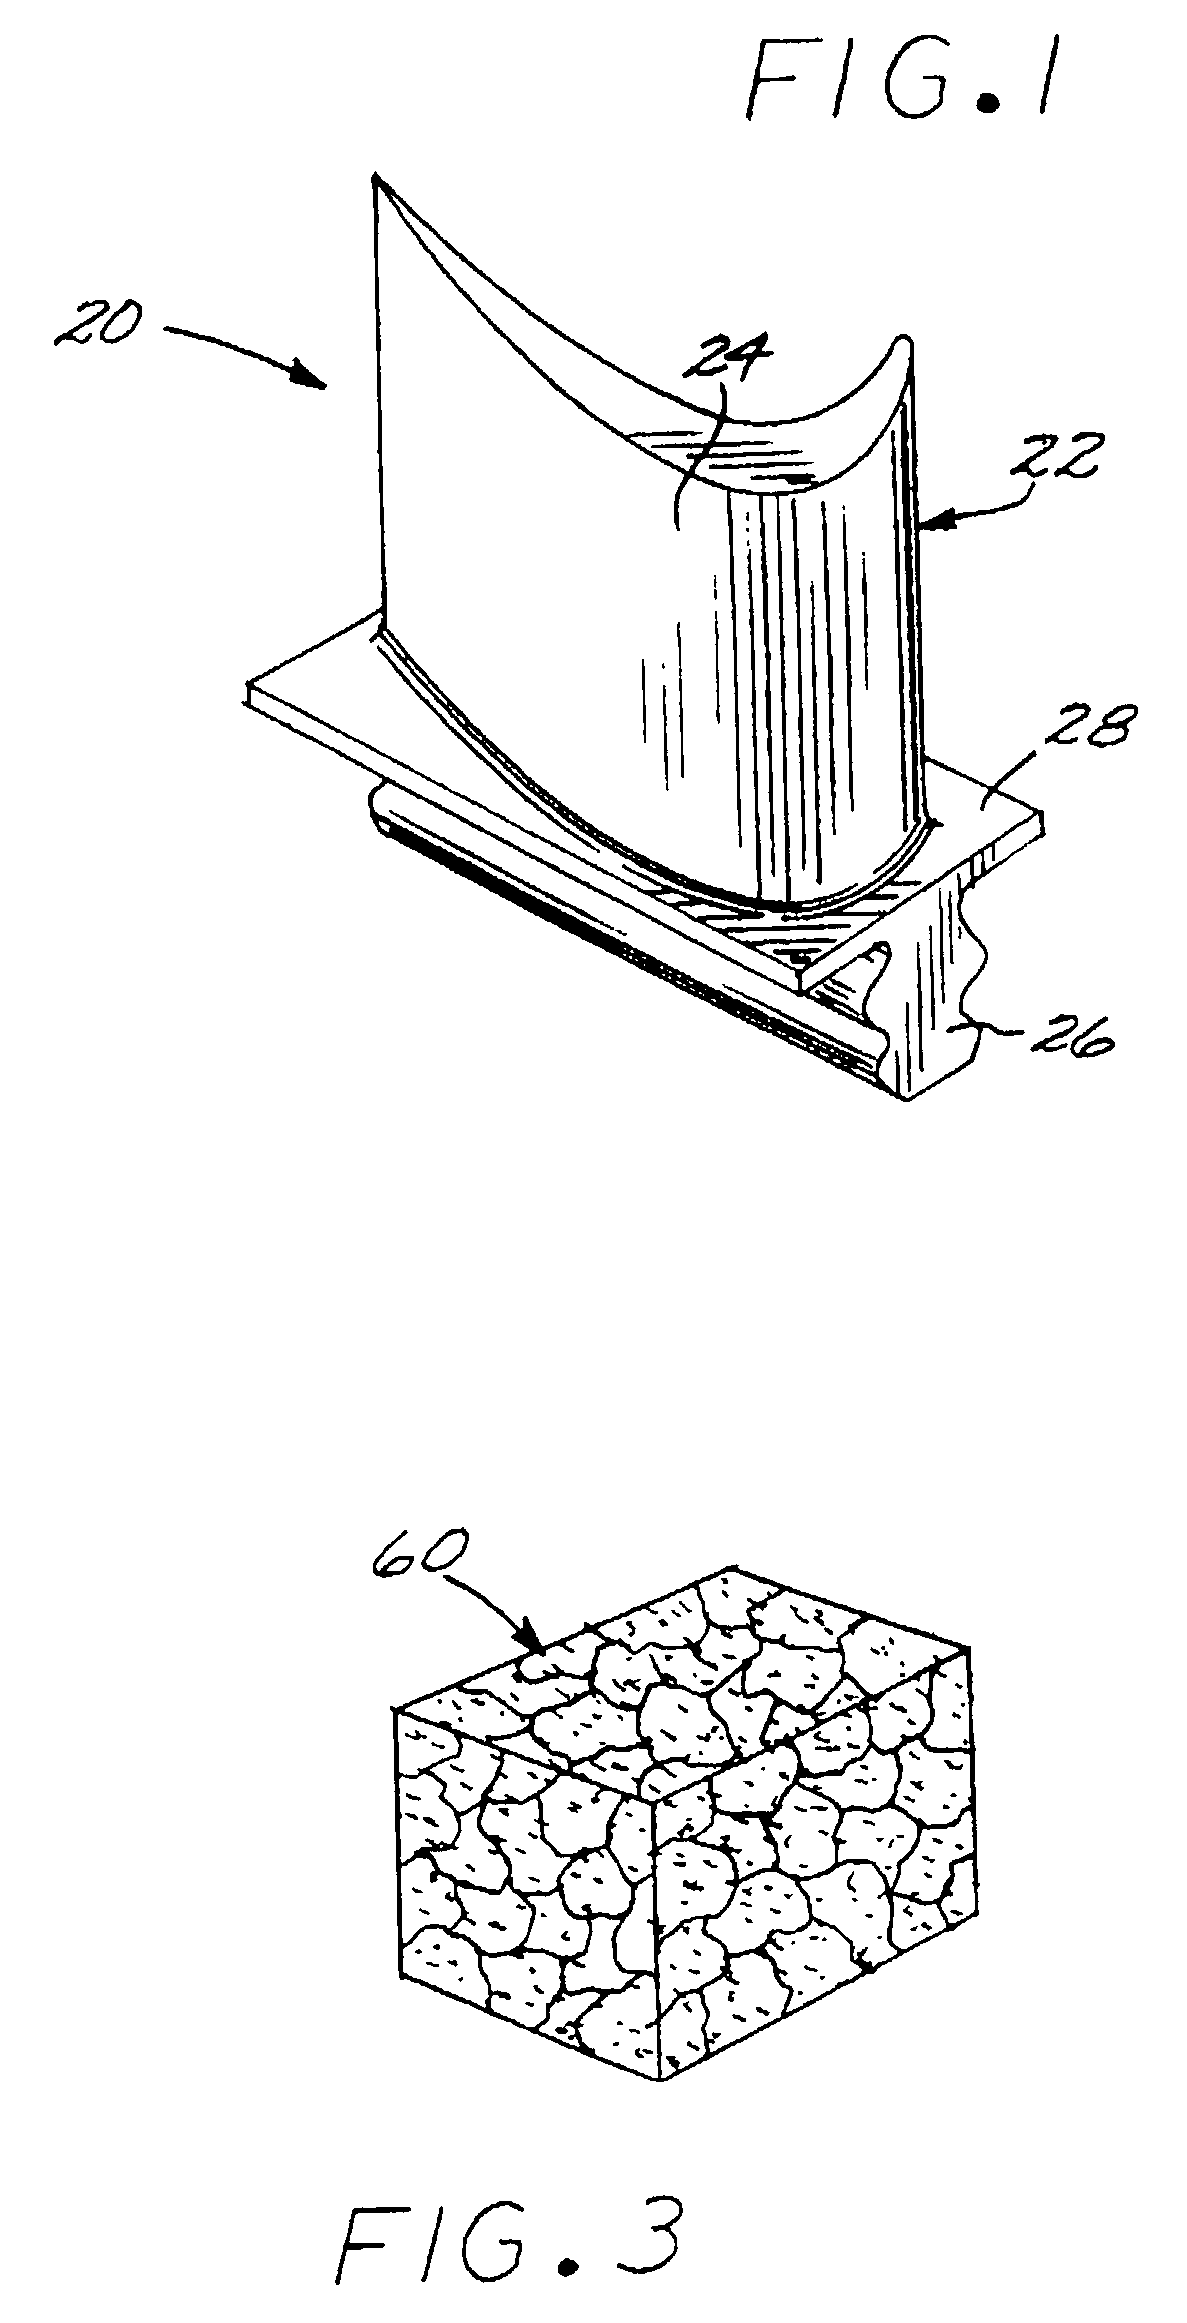 Method for fabricating a metallic article without any melting